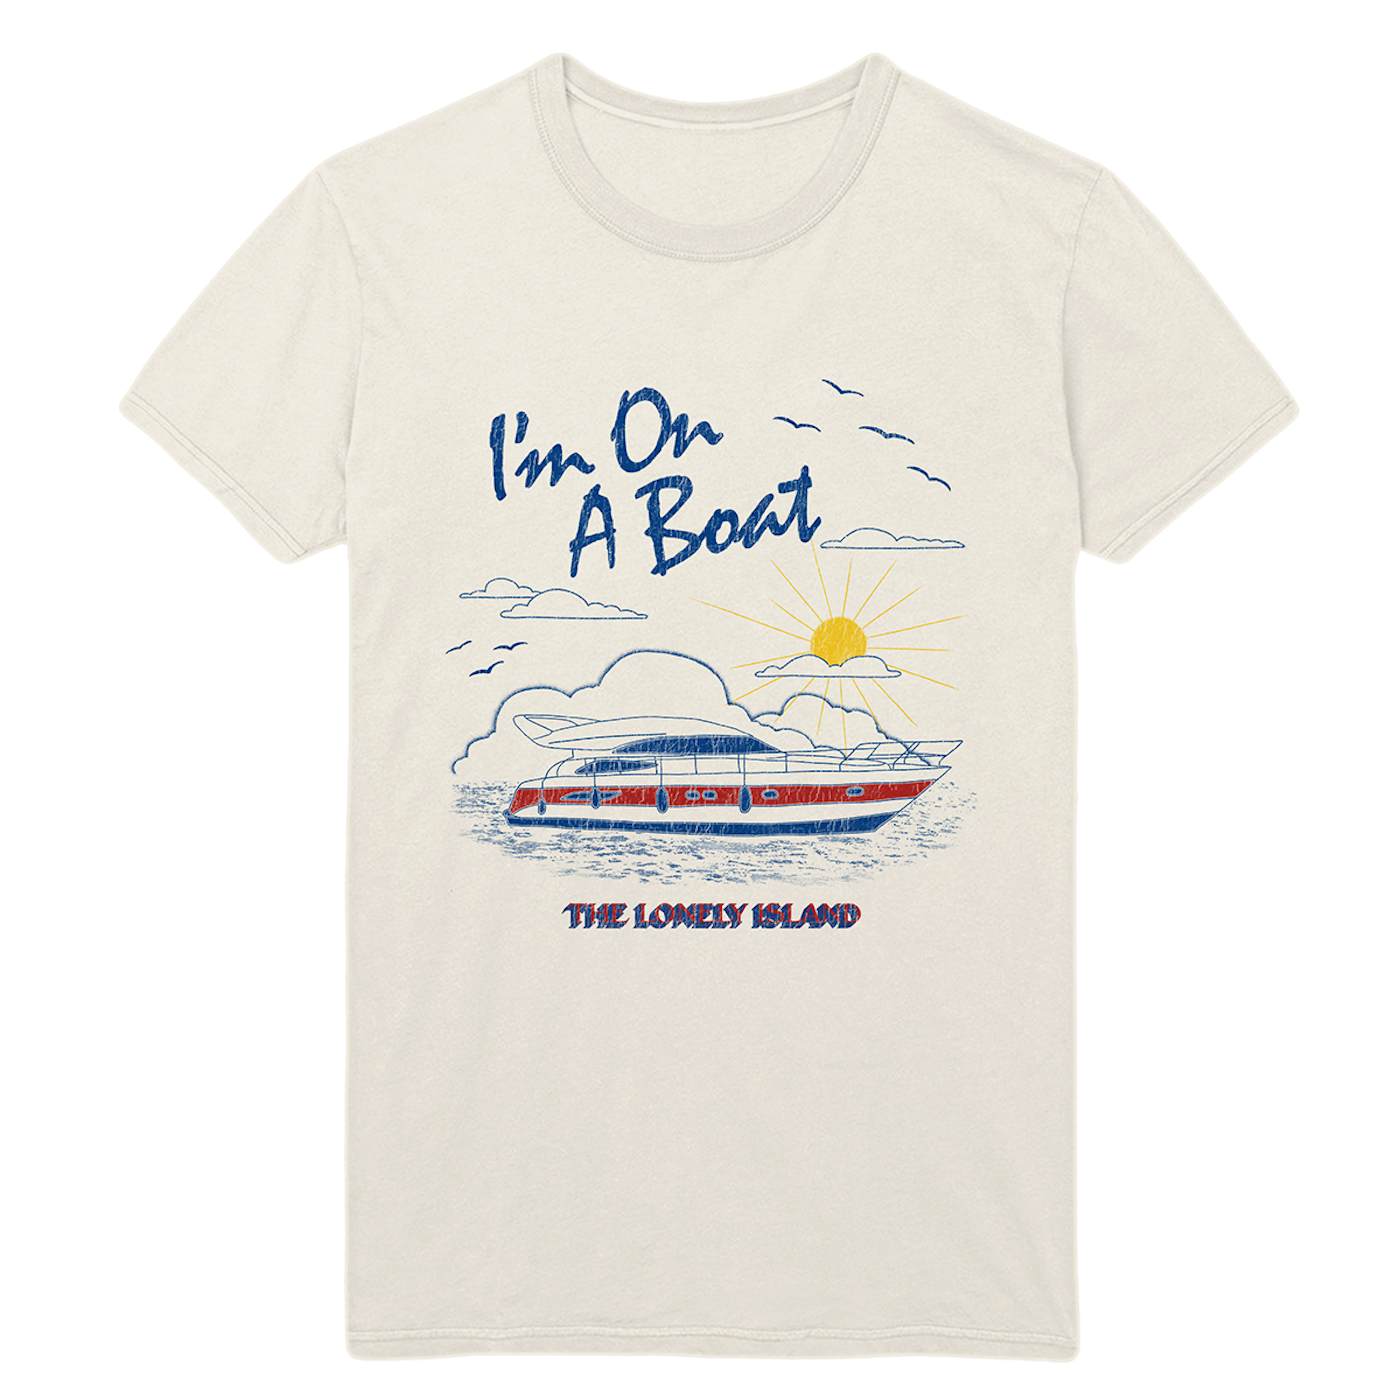 The Lonely Island Yacht Club Tee